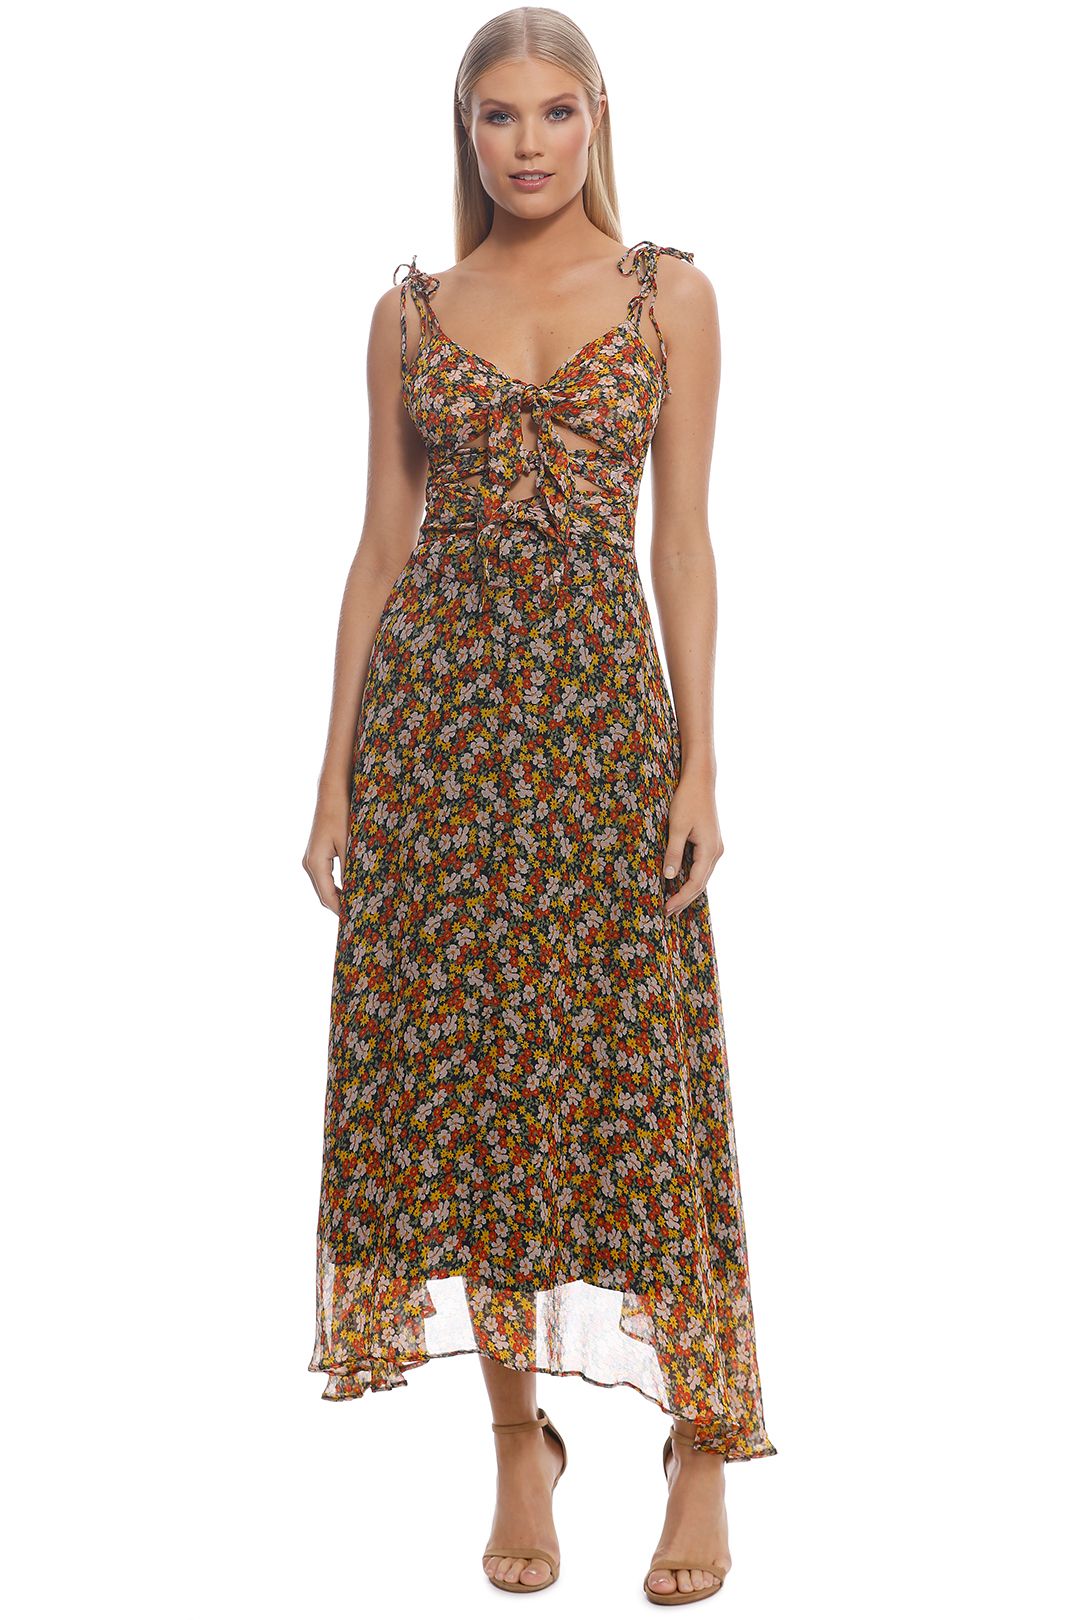 Bec and Bridge - Stevie Tie Dress - Yellow Floral - Front